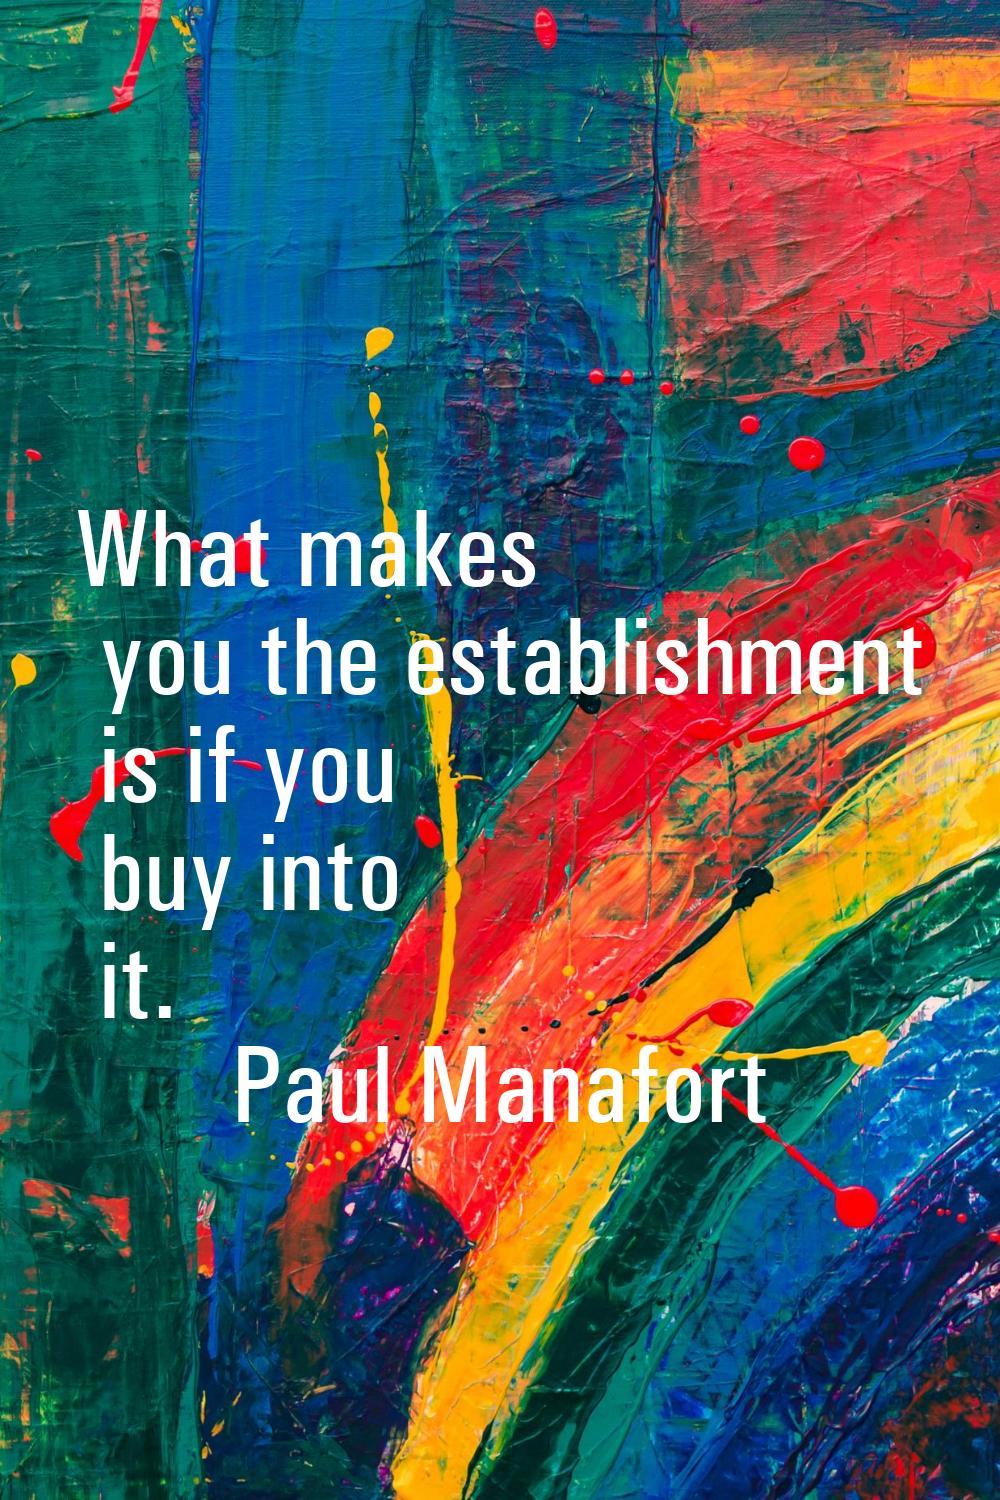 What makes you the establishment is if you buy into it.